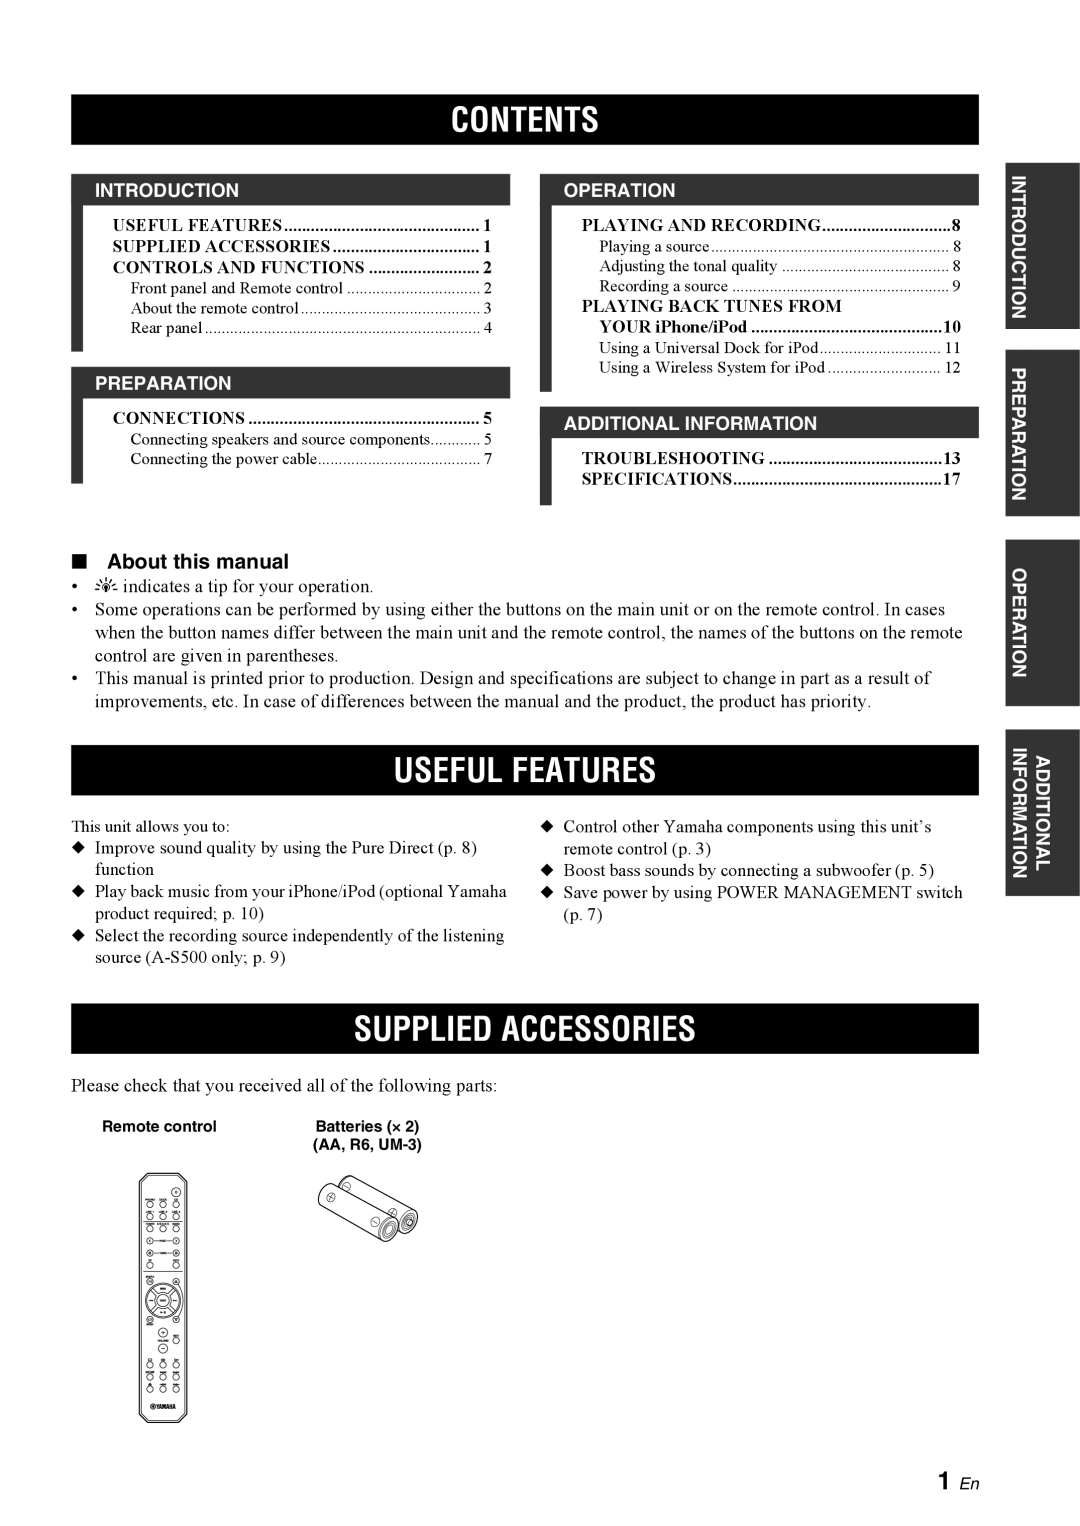 Yamaha A-S300BL Contents, Useful Features, 1 En, About this manual, Introduction, Preparation, Operation, Information 